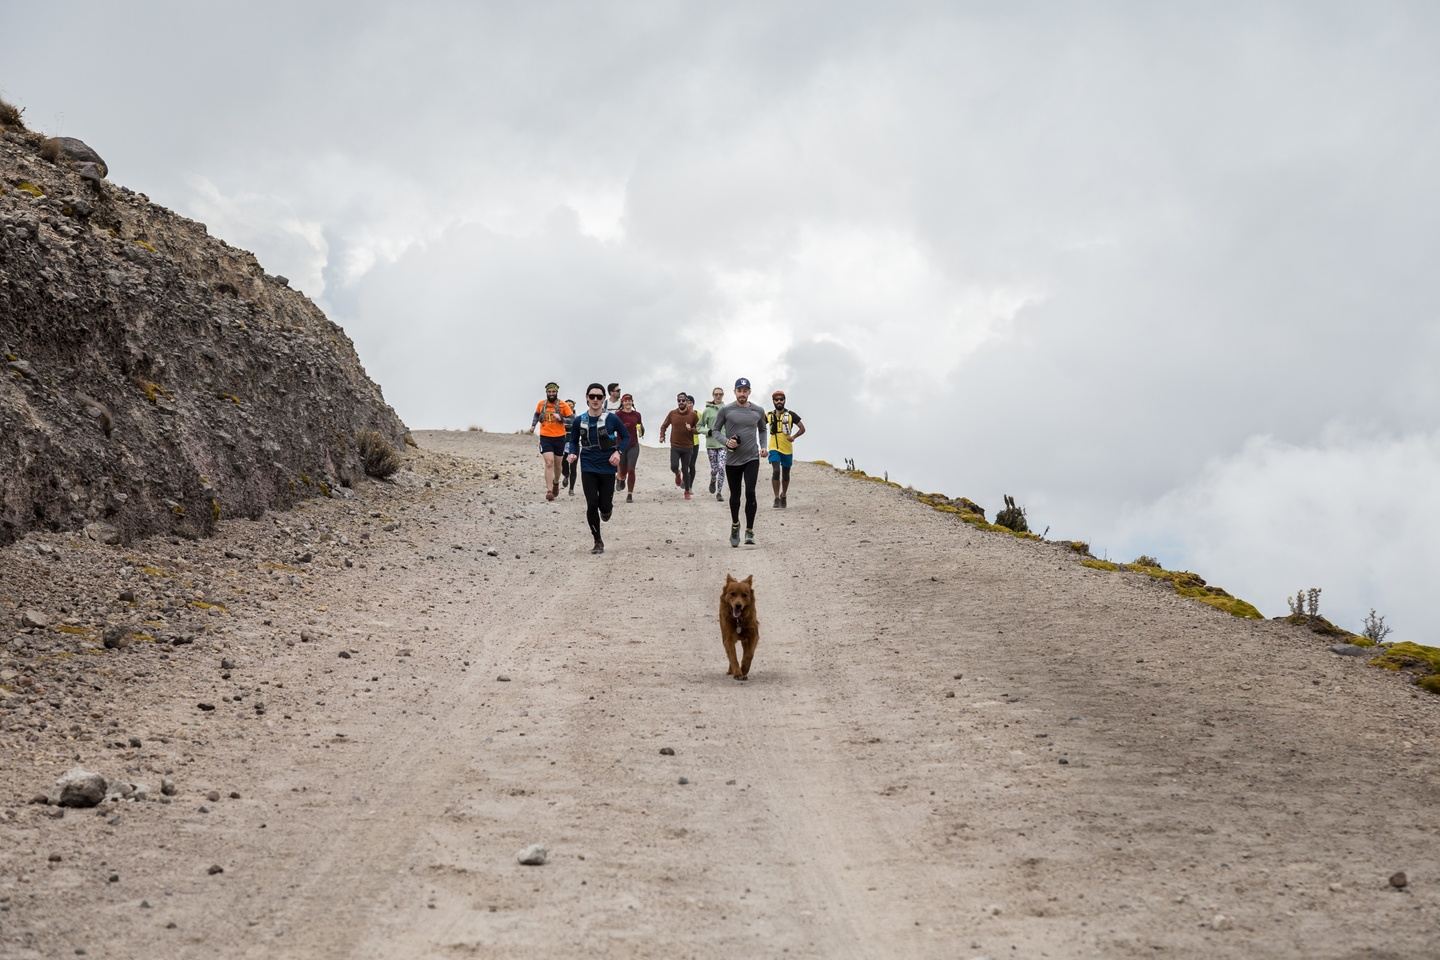 MEXICO CITY & SURROUNDINGS RUNNING EXPERIENCE AUG 2019